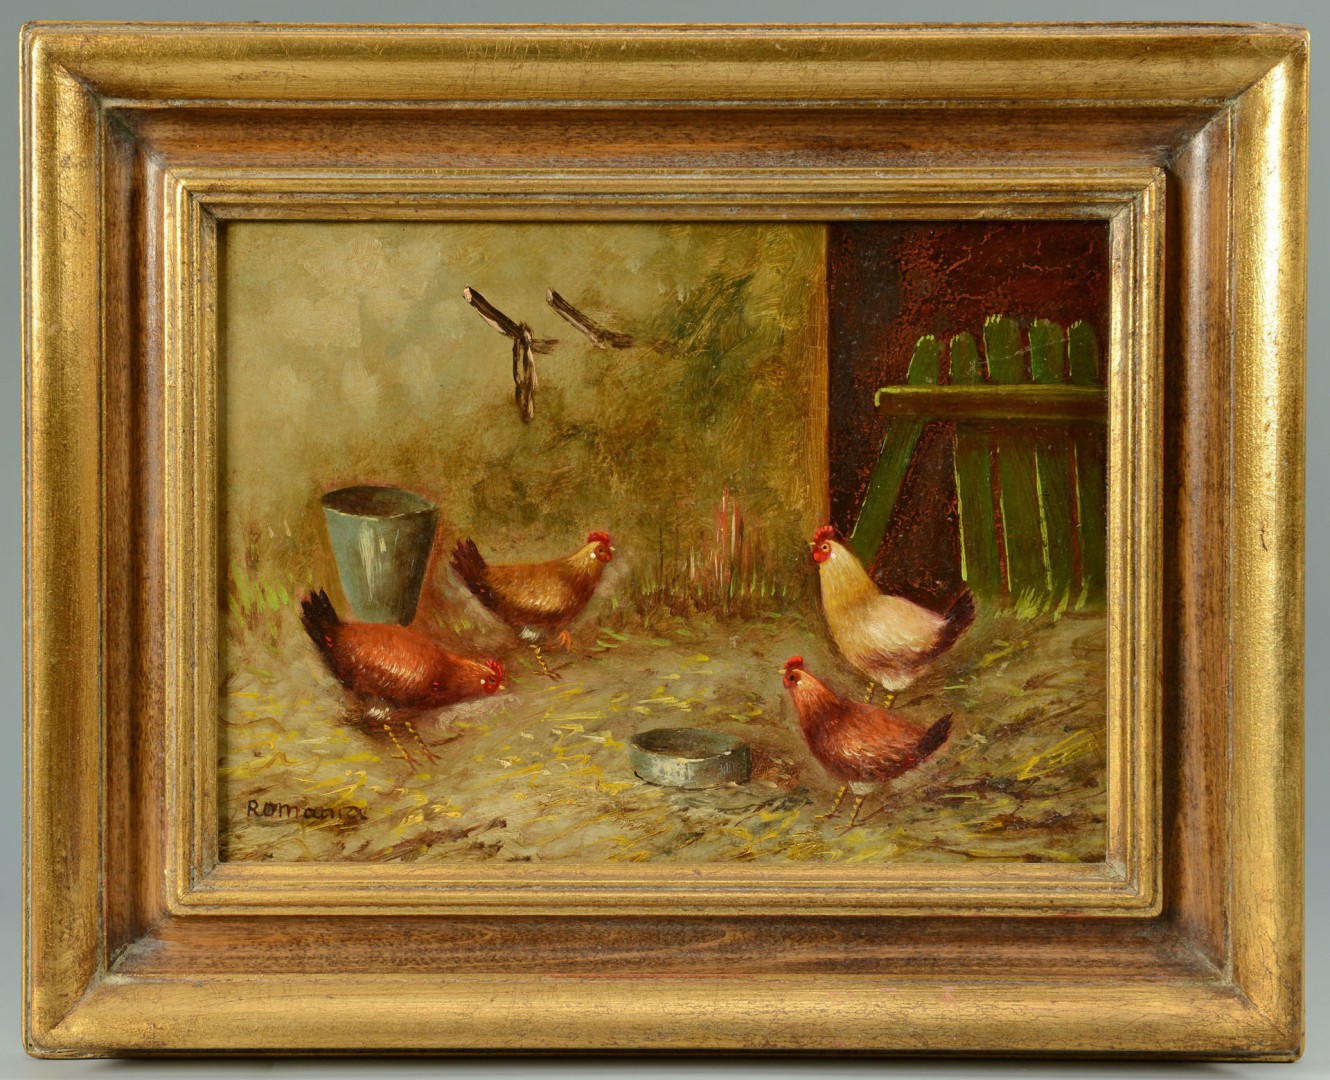 Lot 606: Pair of Chicken paintings by G. Romania